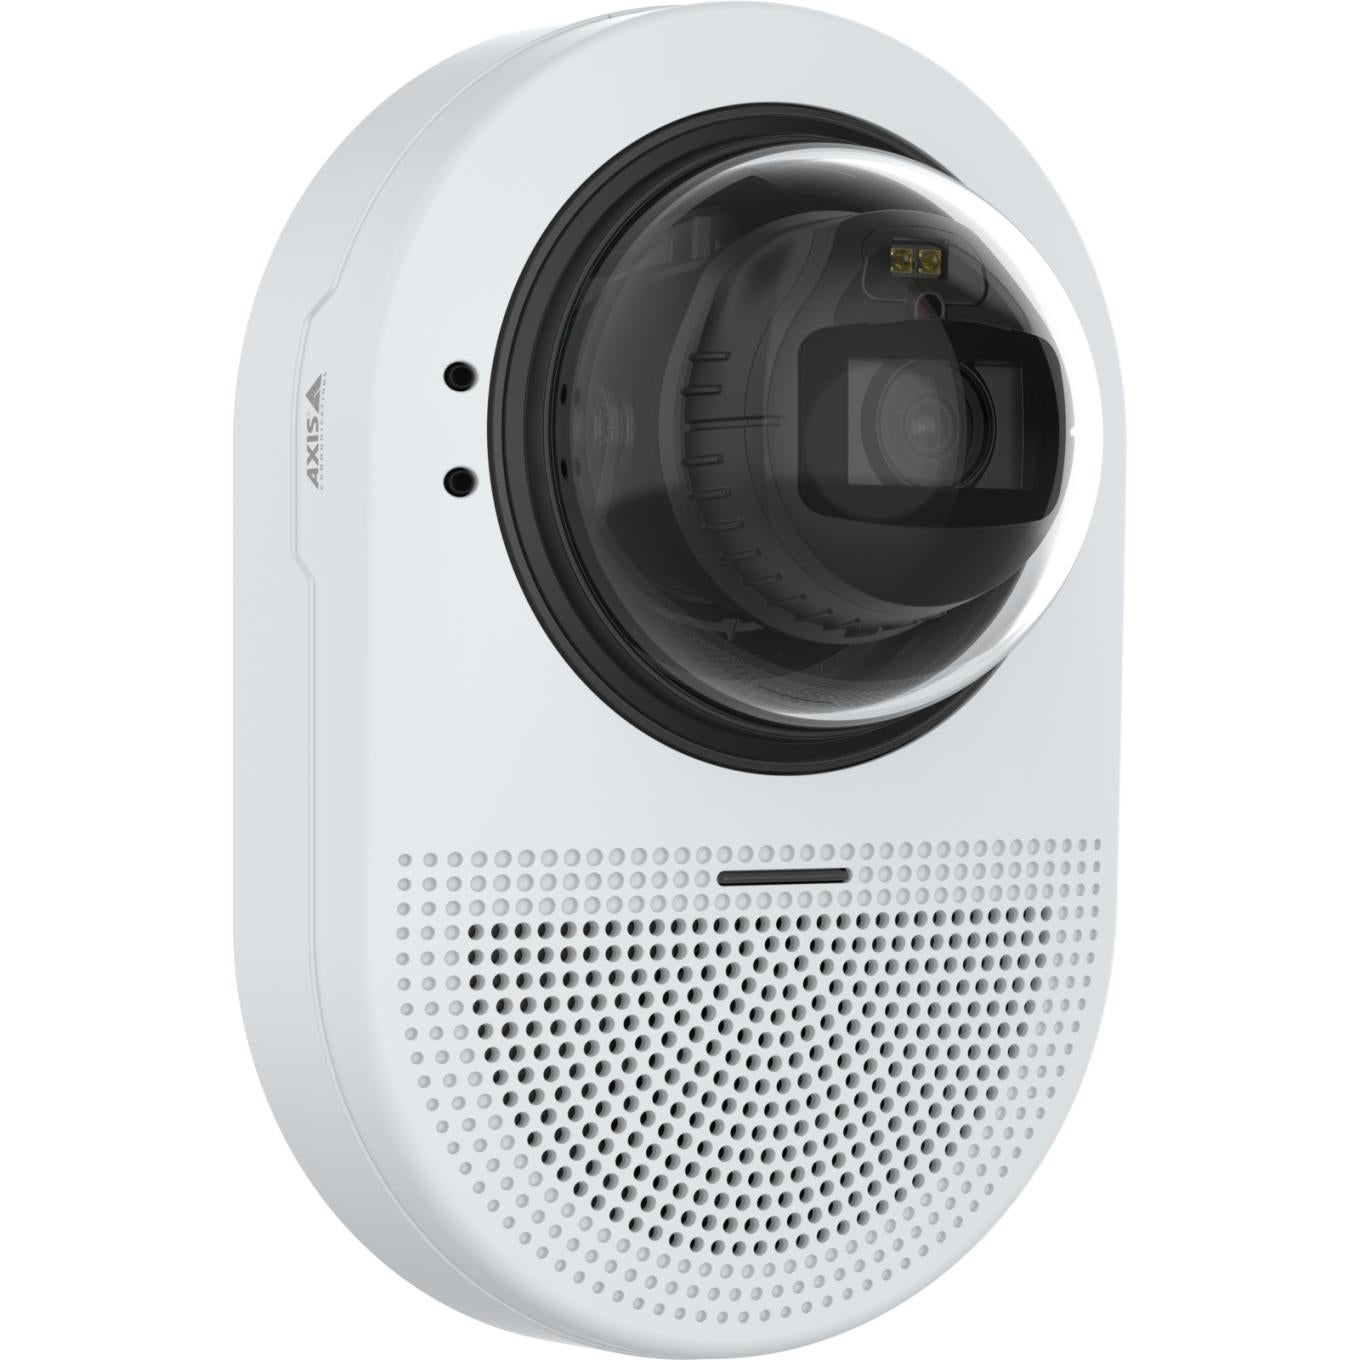 Axis AXIS Q9307-LV (02487-001) Dome Camera All-in-one audio-visual monitoring device